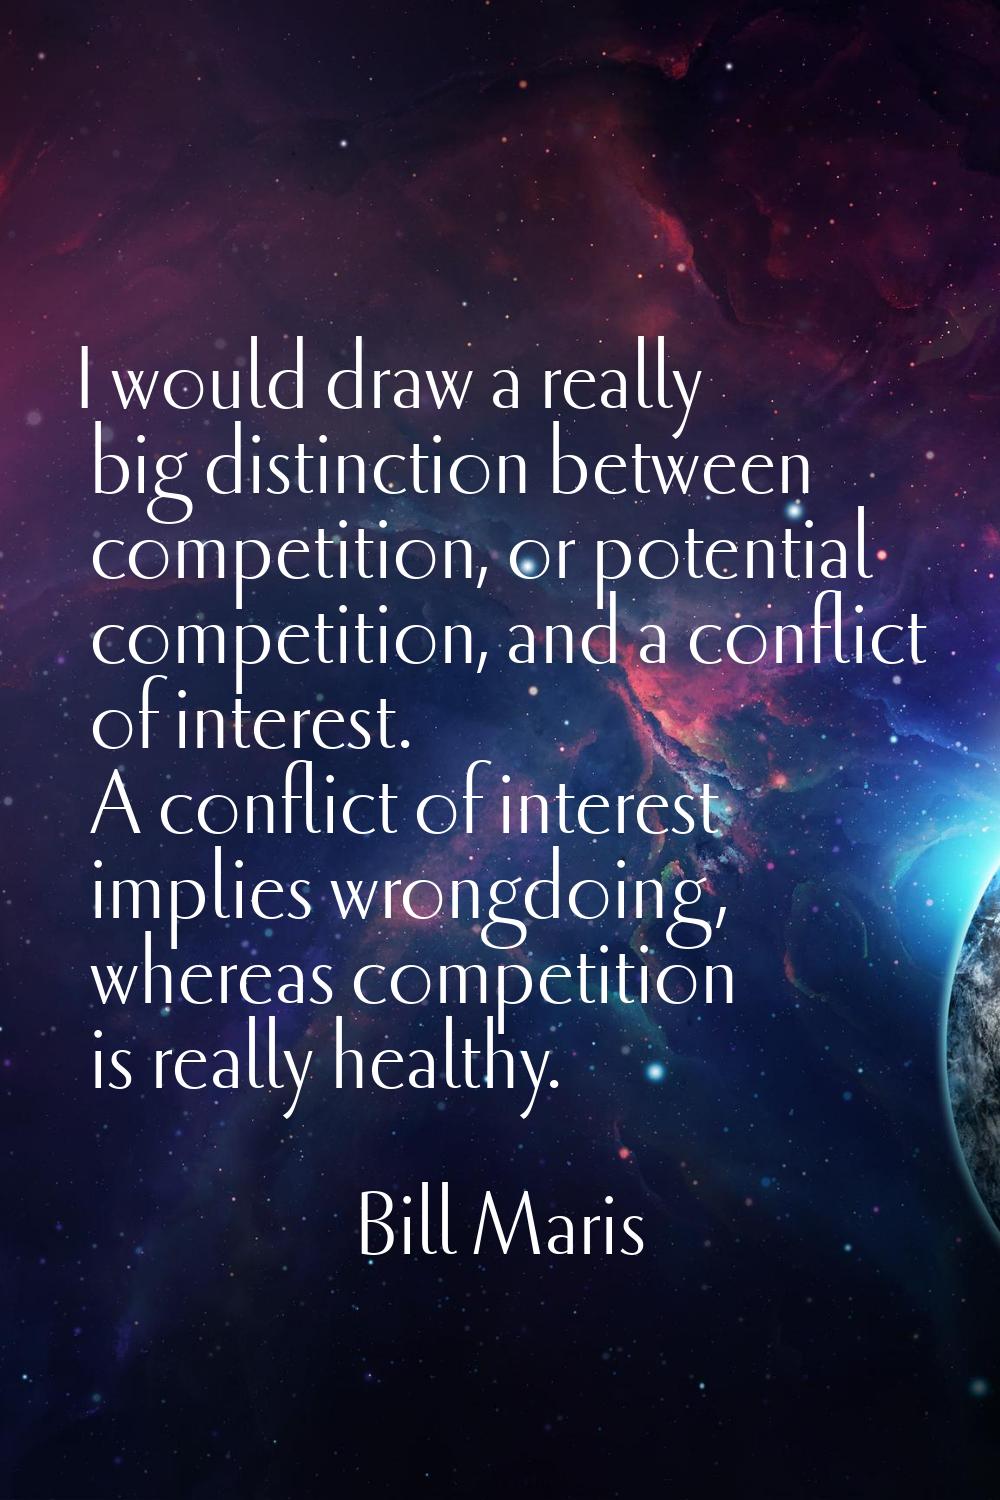 I would draw a really big distinction between competition, or potential competition, and a conflict